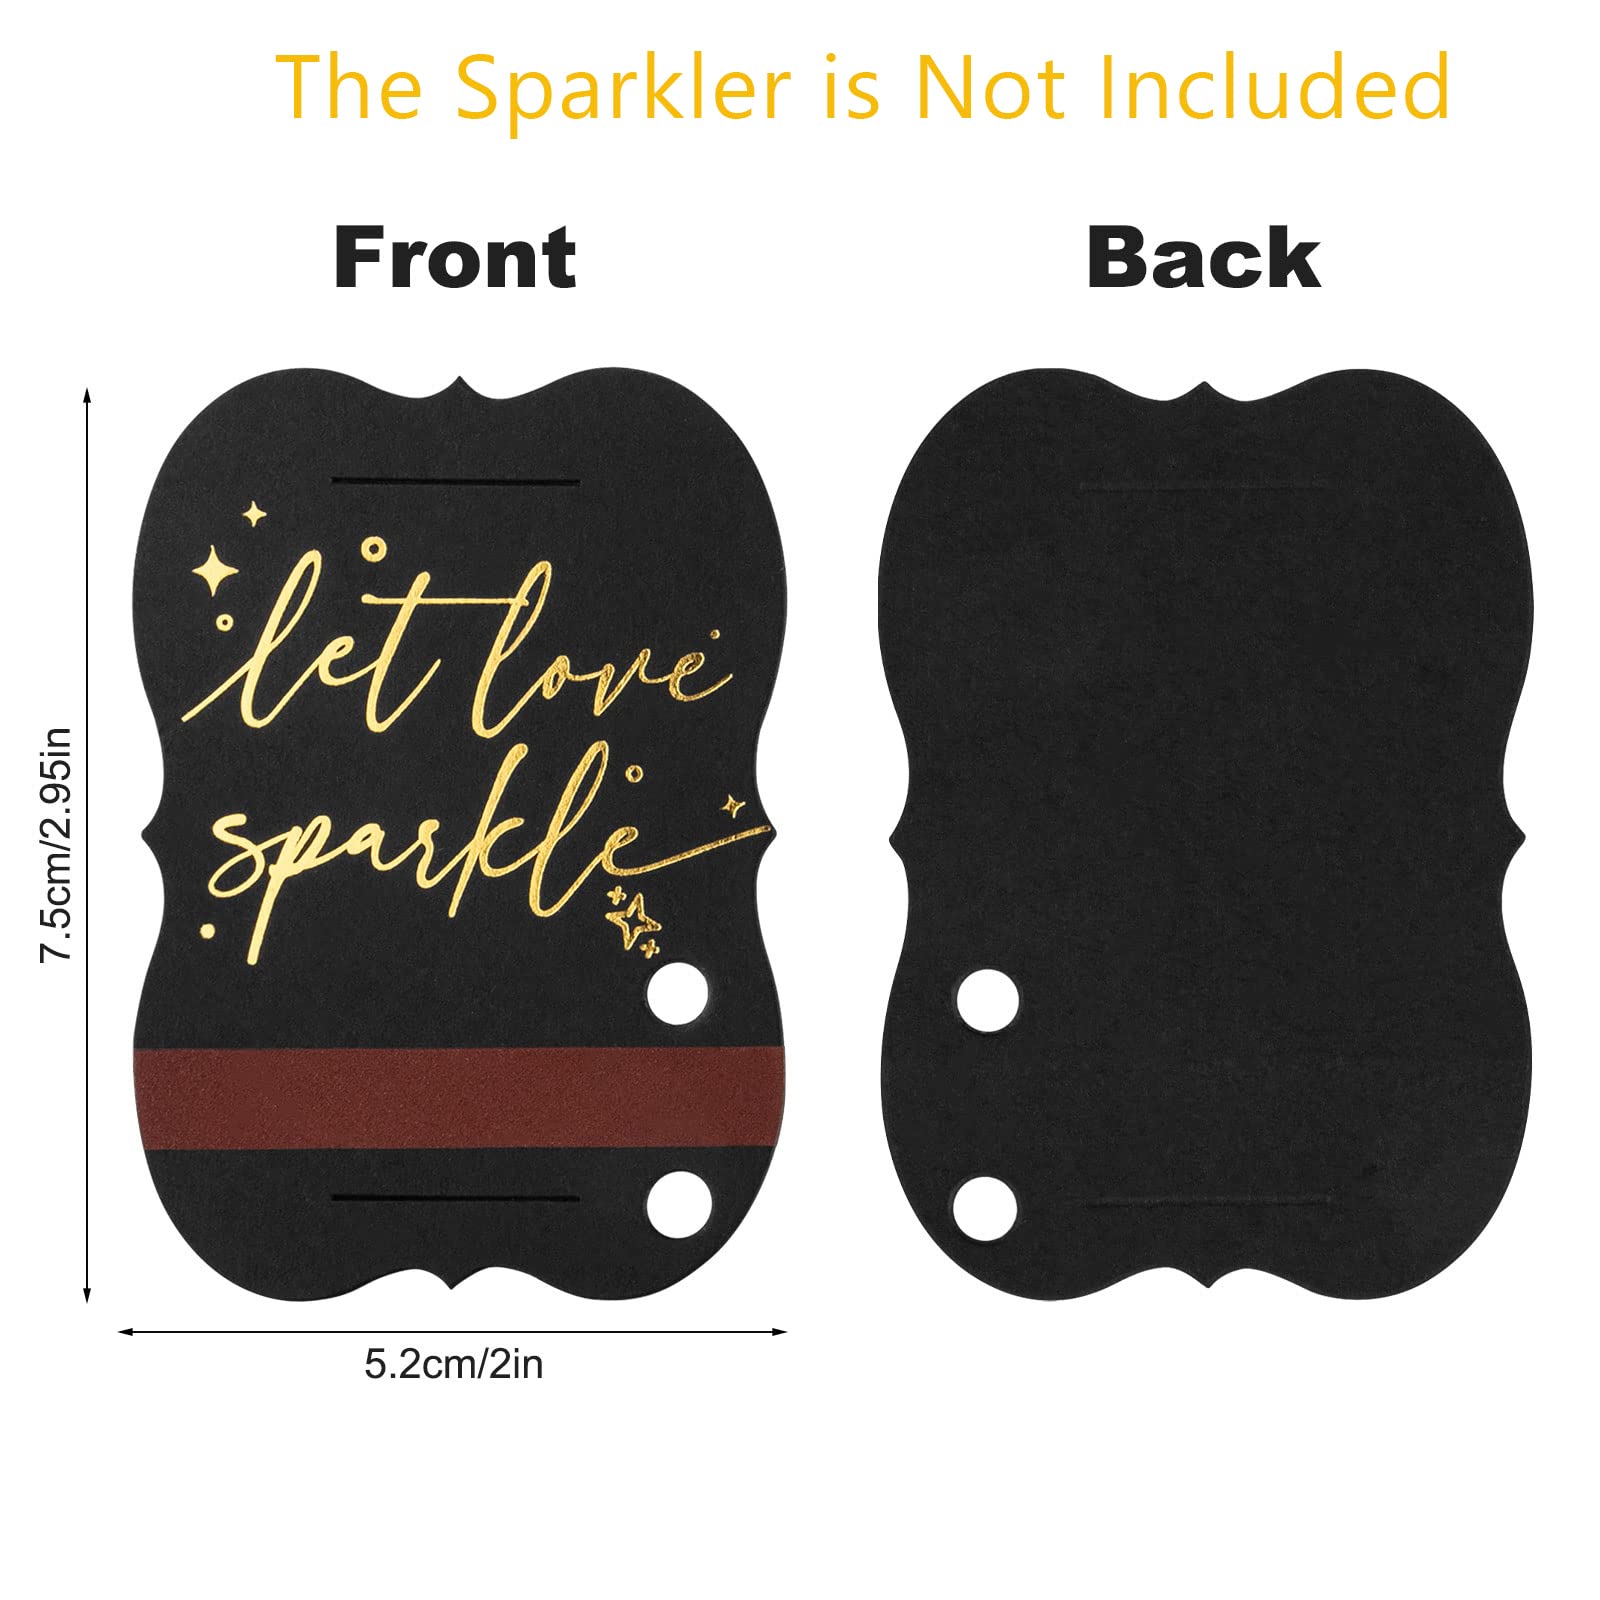 100 PCS Wedding Send Off Sparkler Tags, “Let Love Sparkle” Gold Foil Stamped Metallic Sparkler Sleeves with Match Striker Strips for Anniversary Parties Graduation Birthday Engagement Event